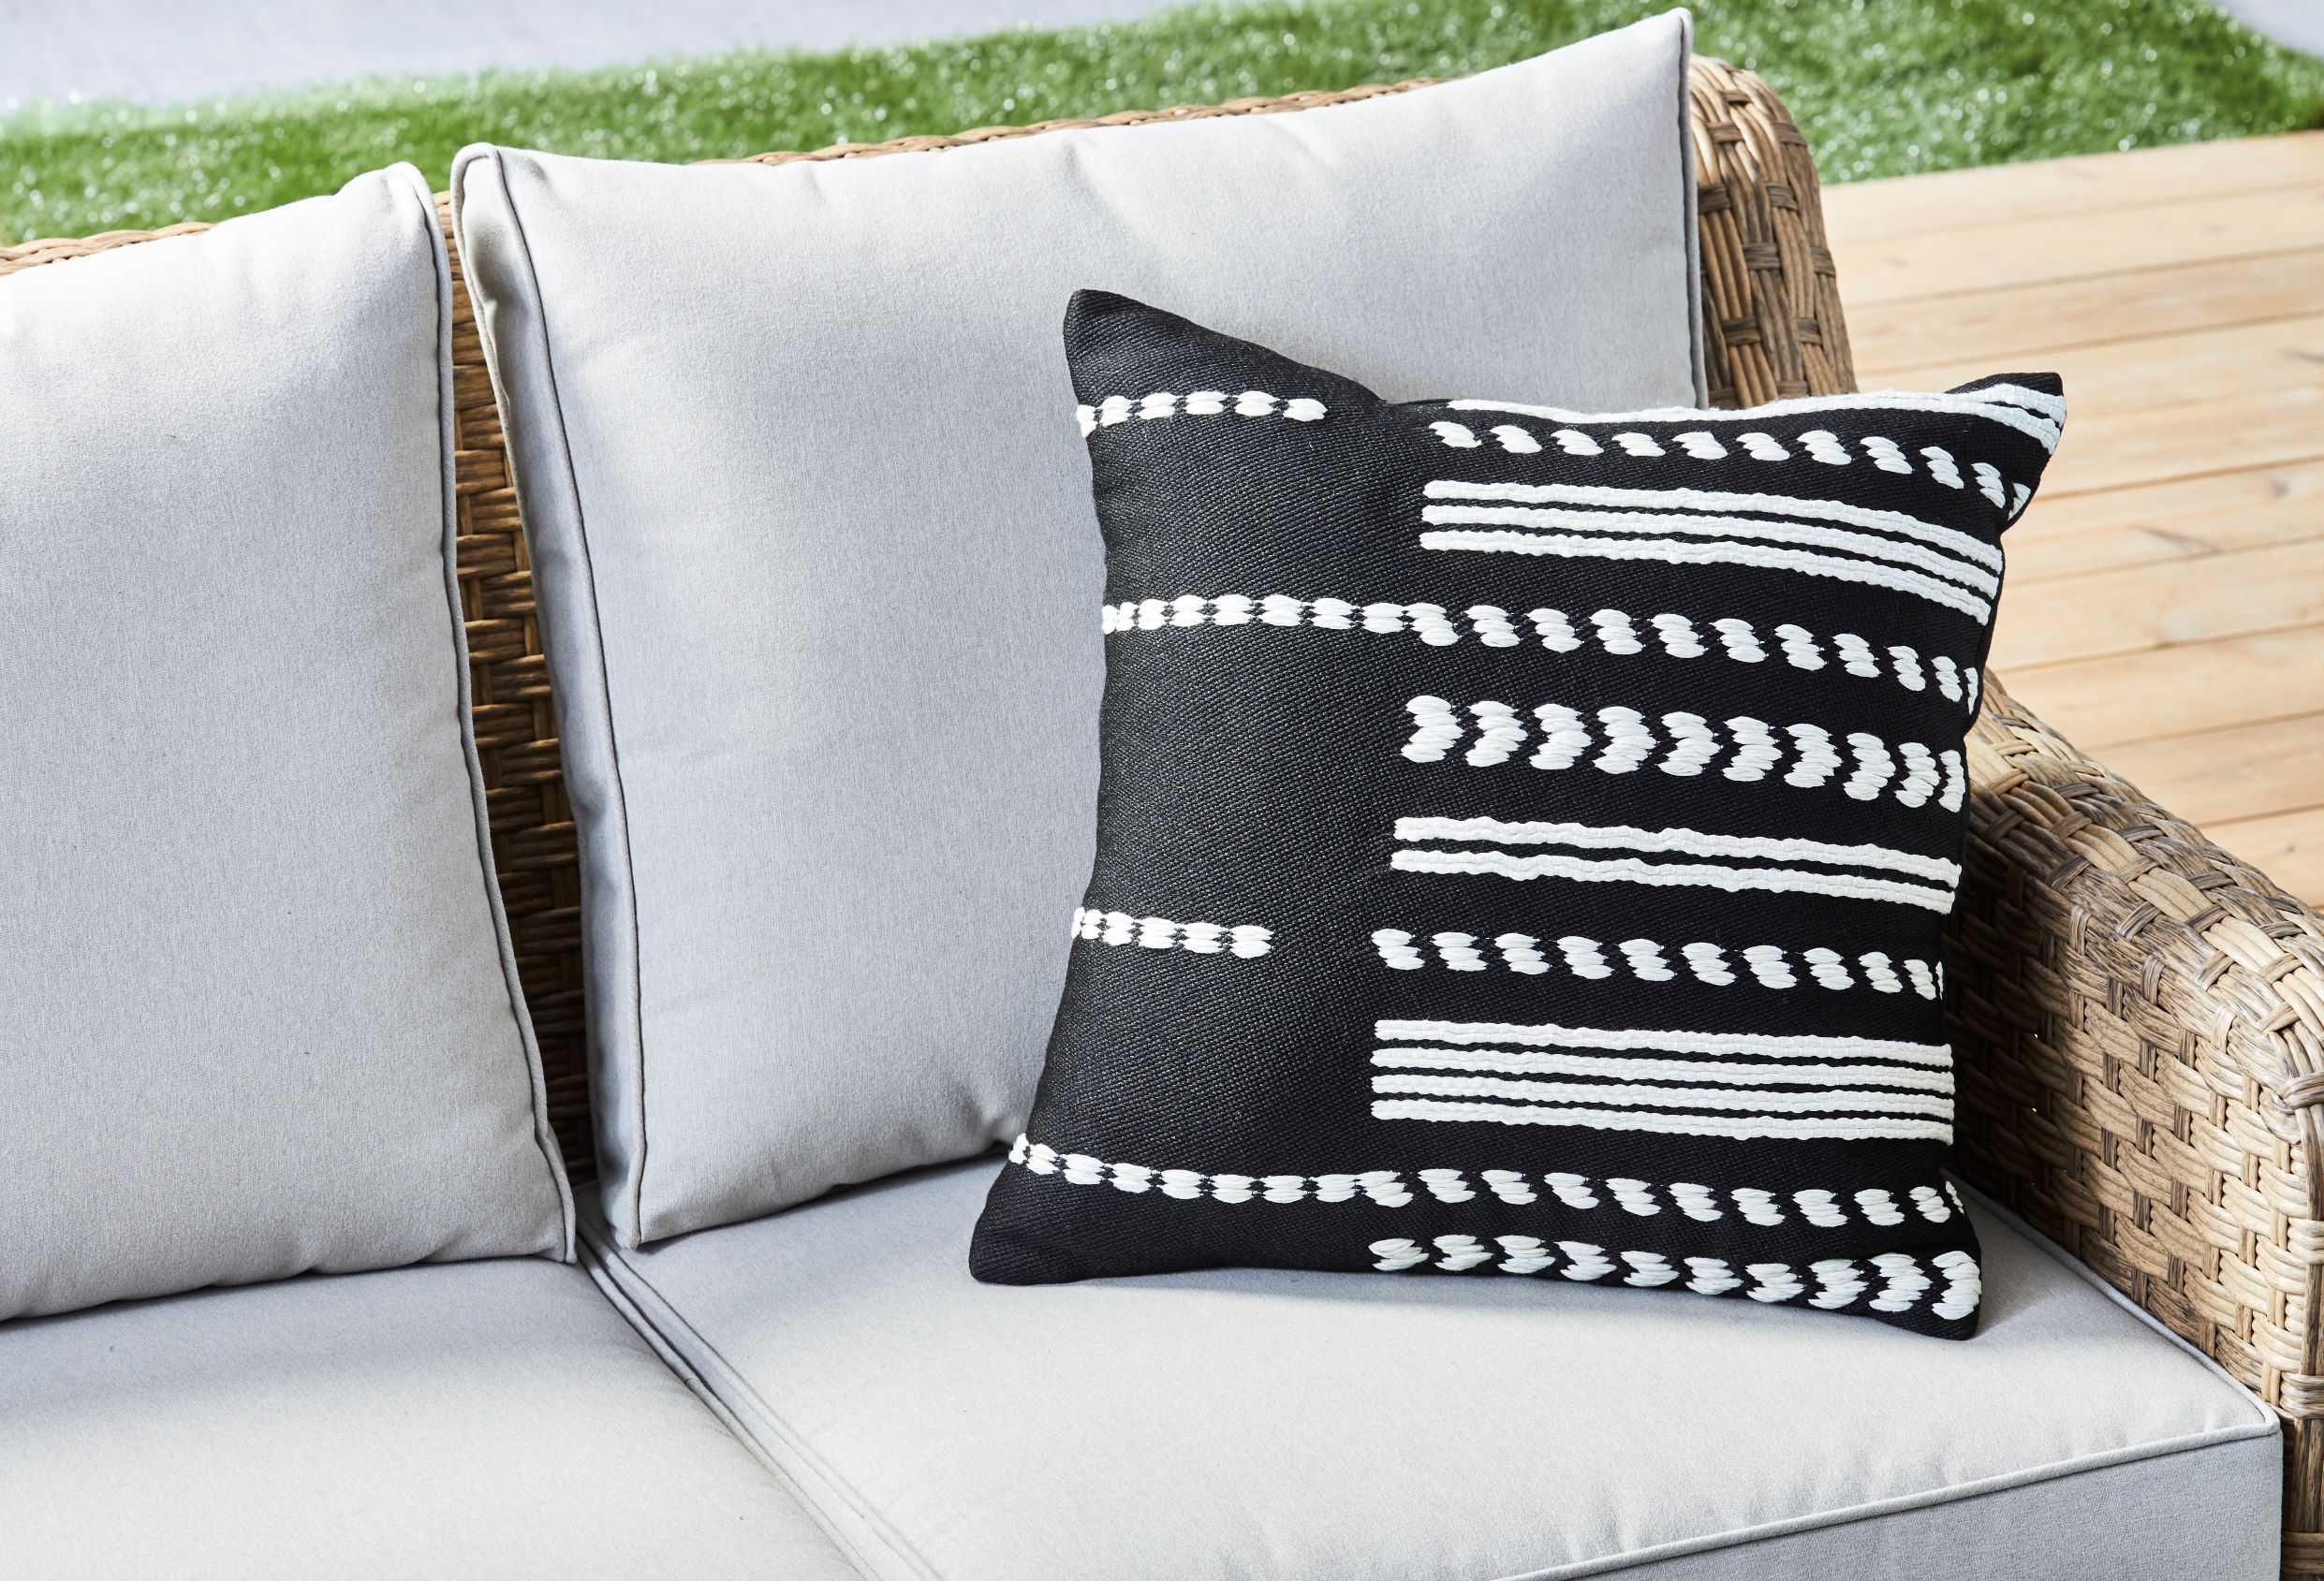 Better Homes & Gardens B&W Stripe Outdoor Throw Pillow, 19" x 19" Square - image 4 of 5